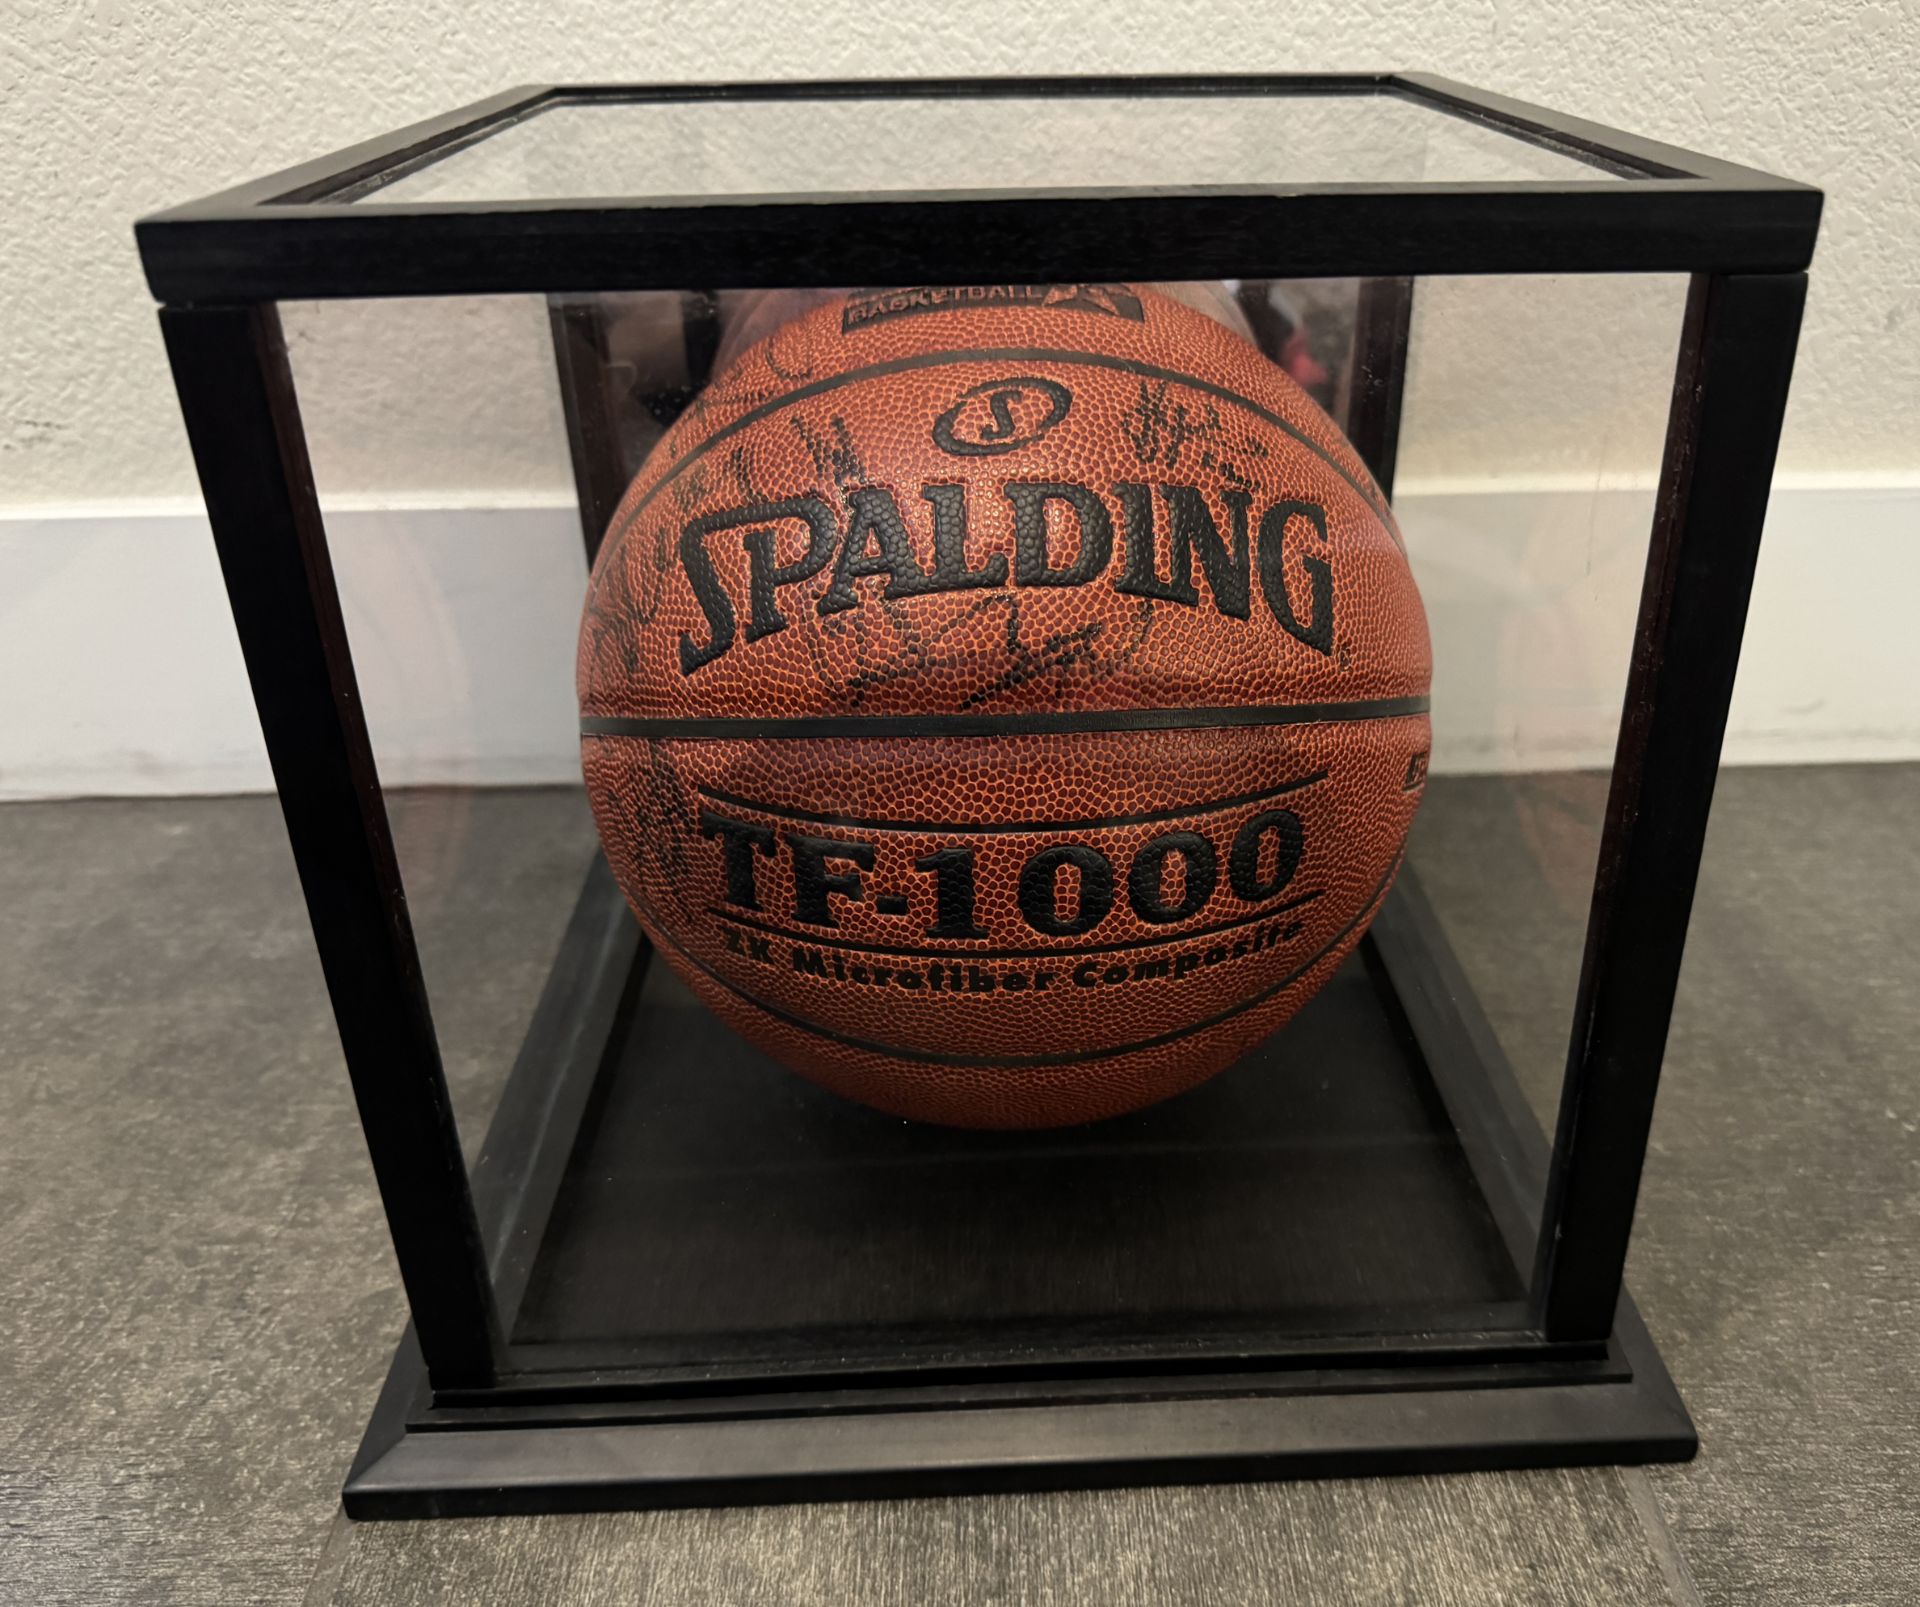 BASKETBALL SIGNED POSSIBLY BY 2012 DREAM TEAM, MISSING MICHAEL JORDAN - Image 2 of 4